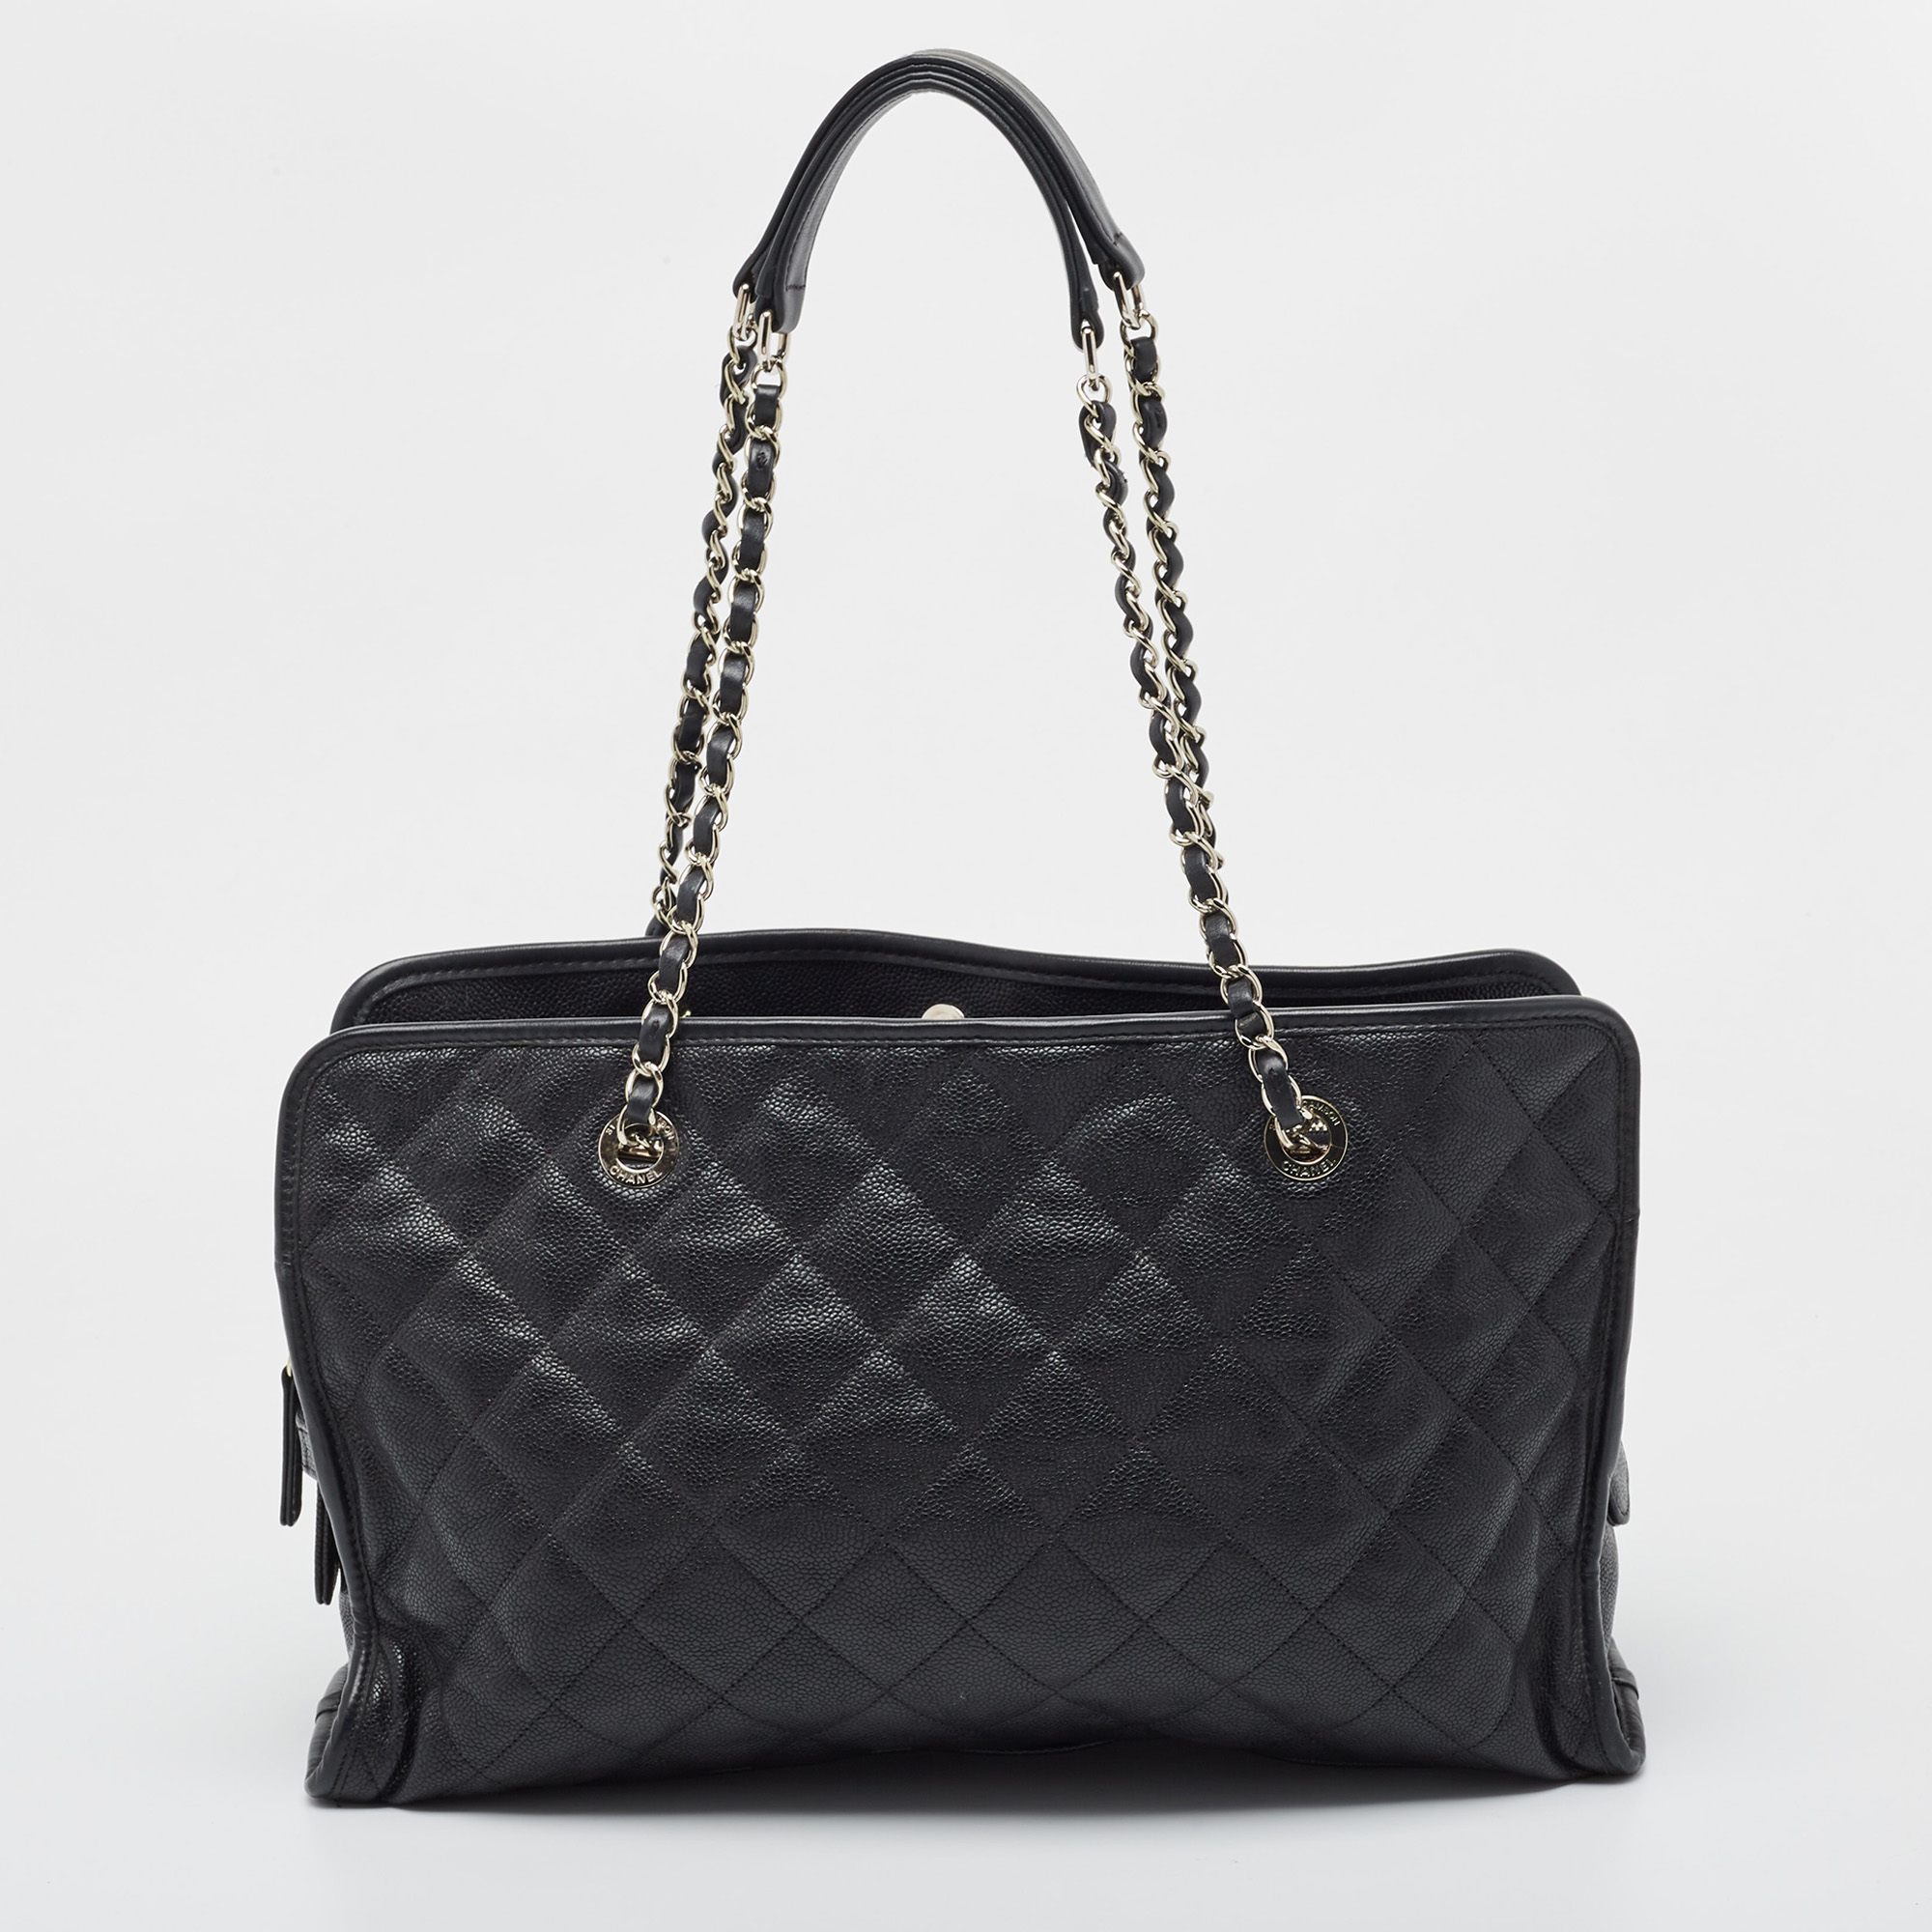 Chanel Black Quilted Caviar Leather French Riviera Tote